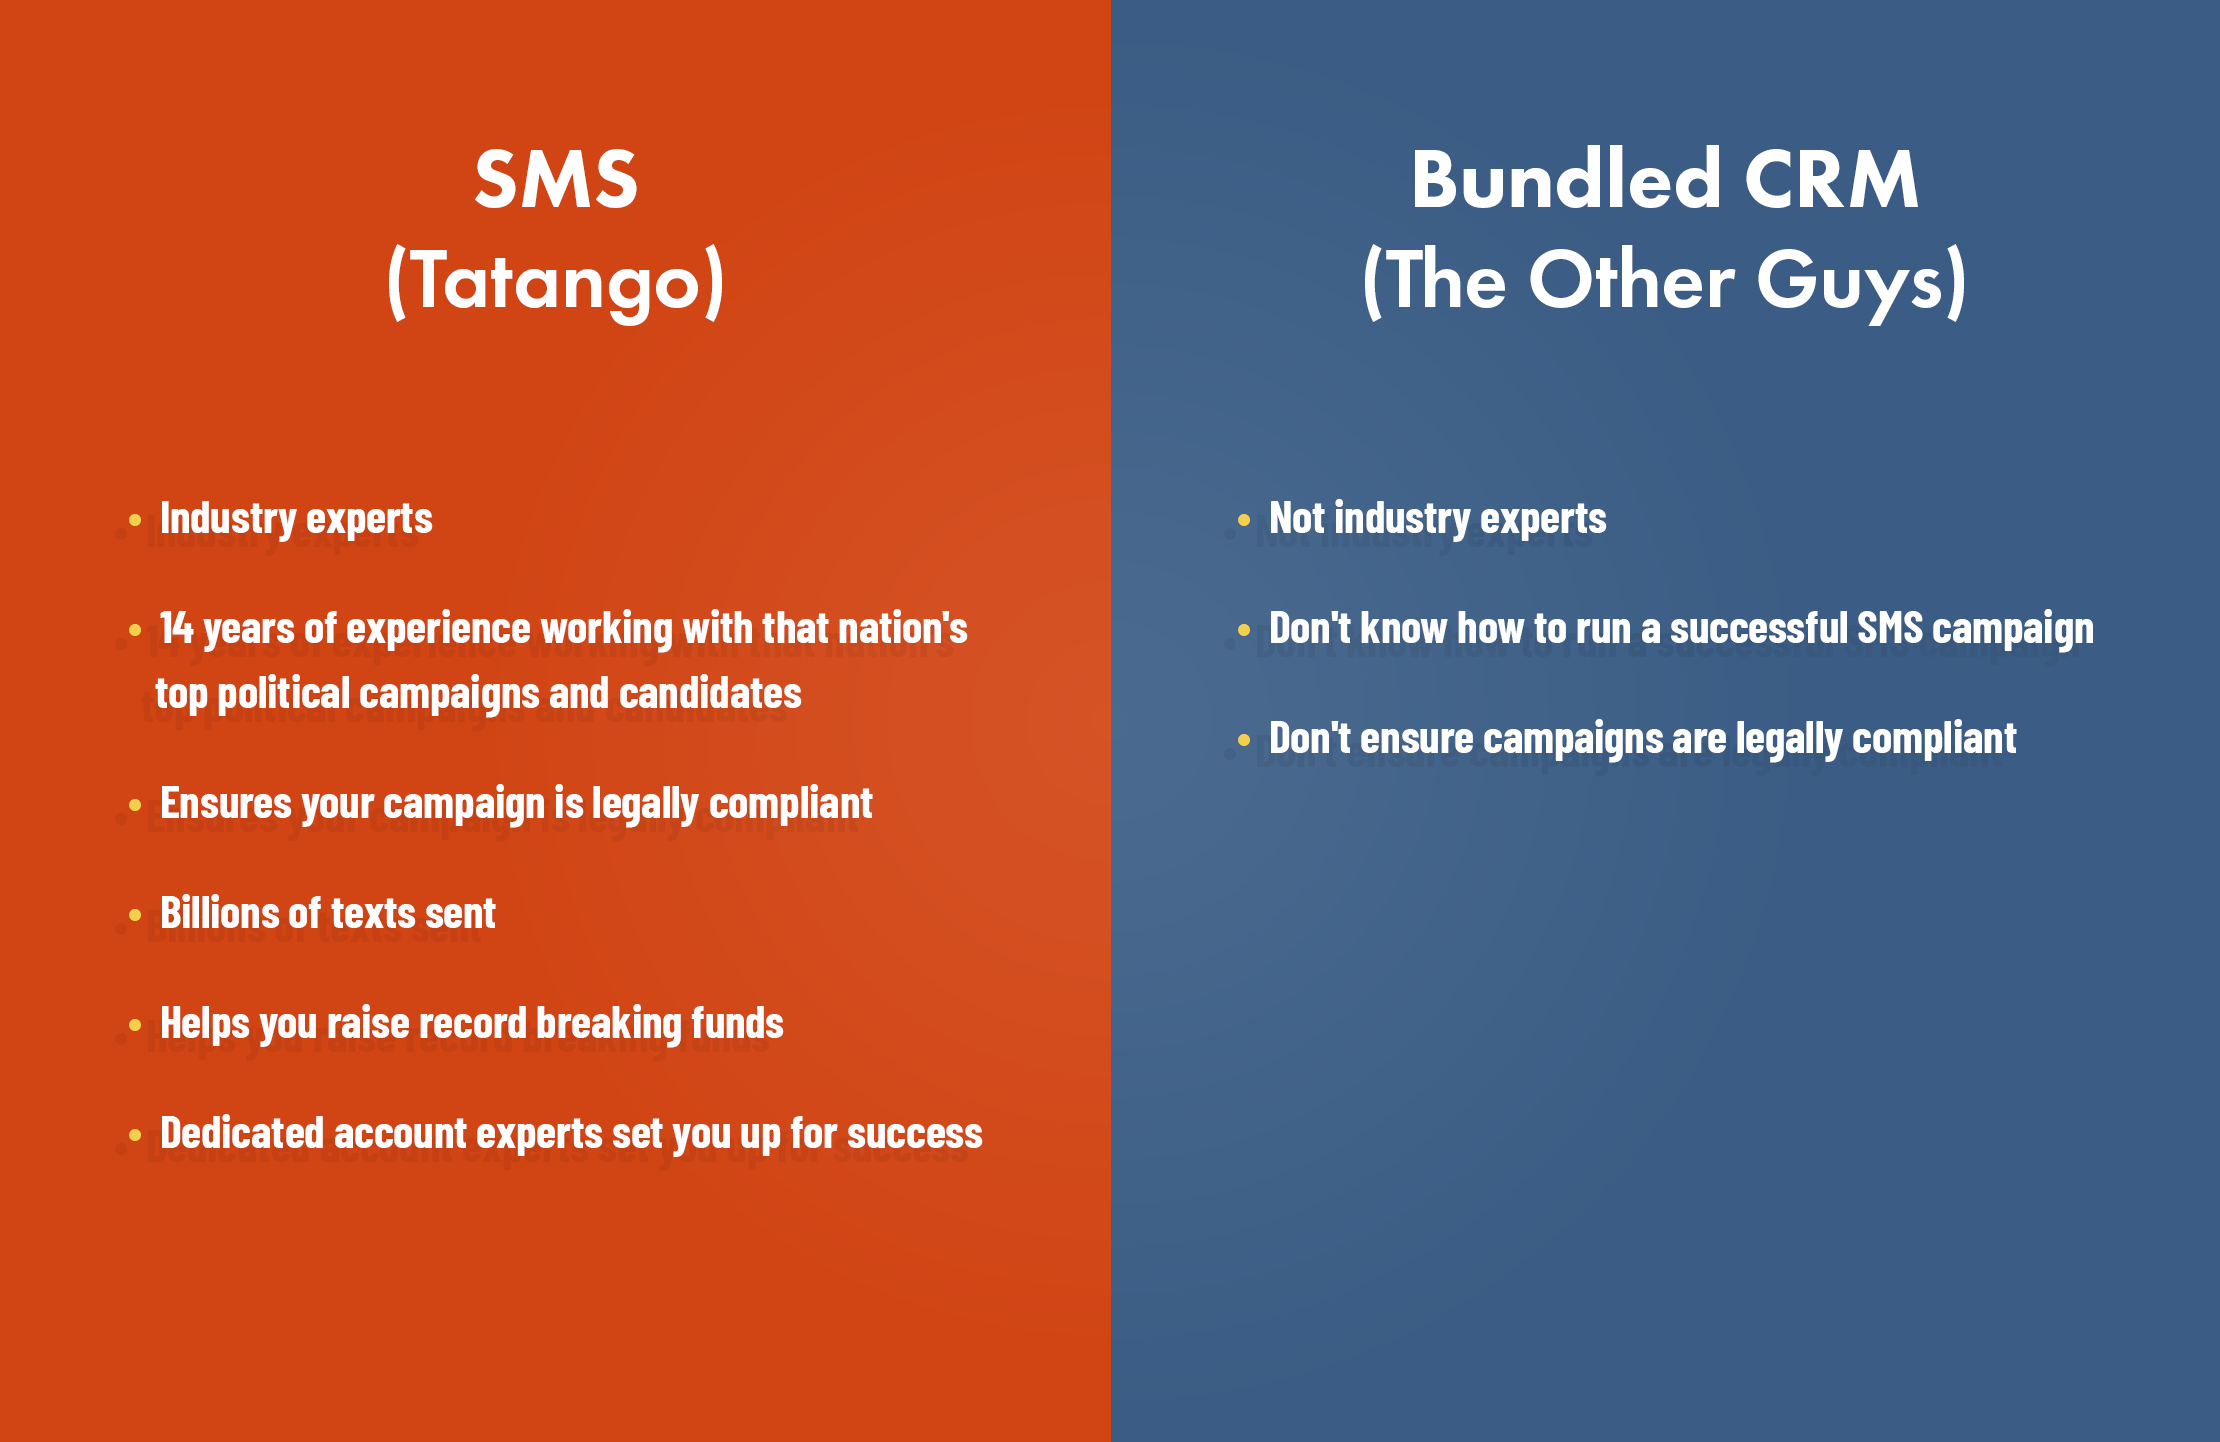 Reasons to Avoid a Cheap CRM Tool That Bundles SMS